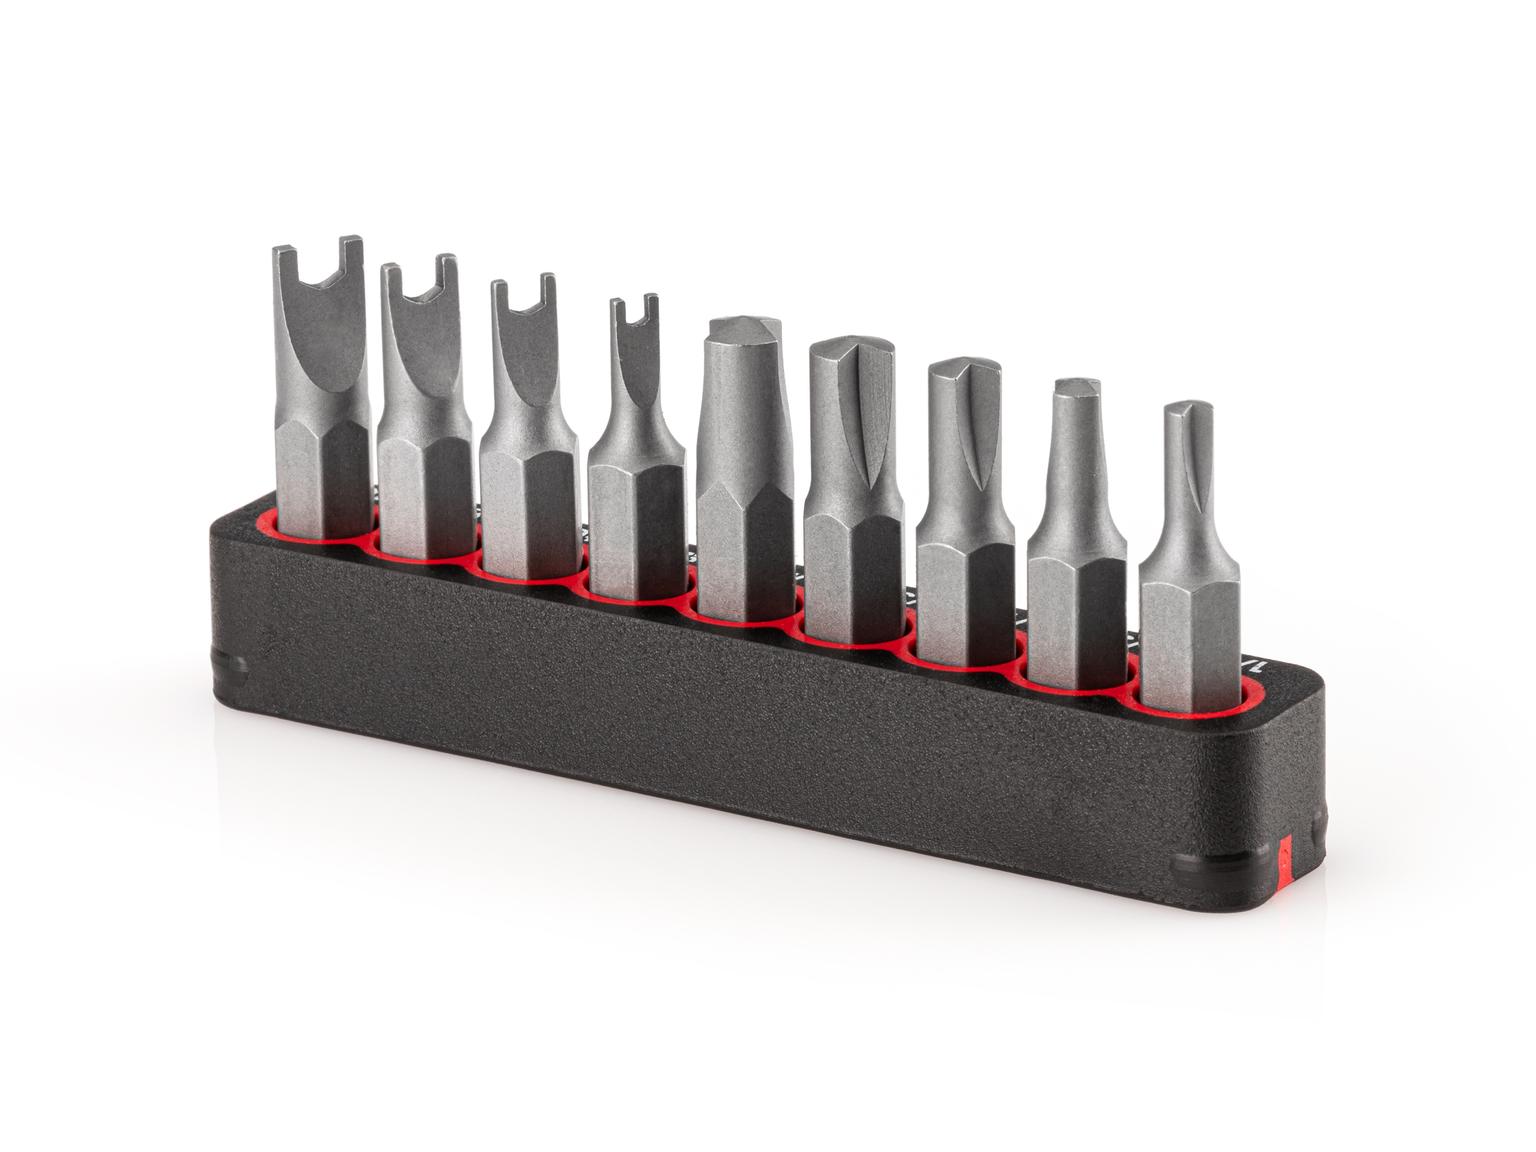 TEKTON DZZ93002-T 1/4 Inch Clutch and Spanner Security Bit Set with Rail, 9-Piece (1/8-1/4 in., #4-#10)